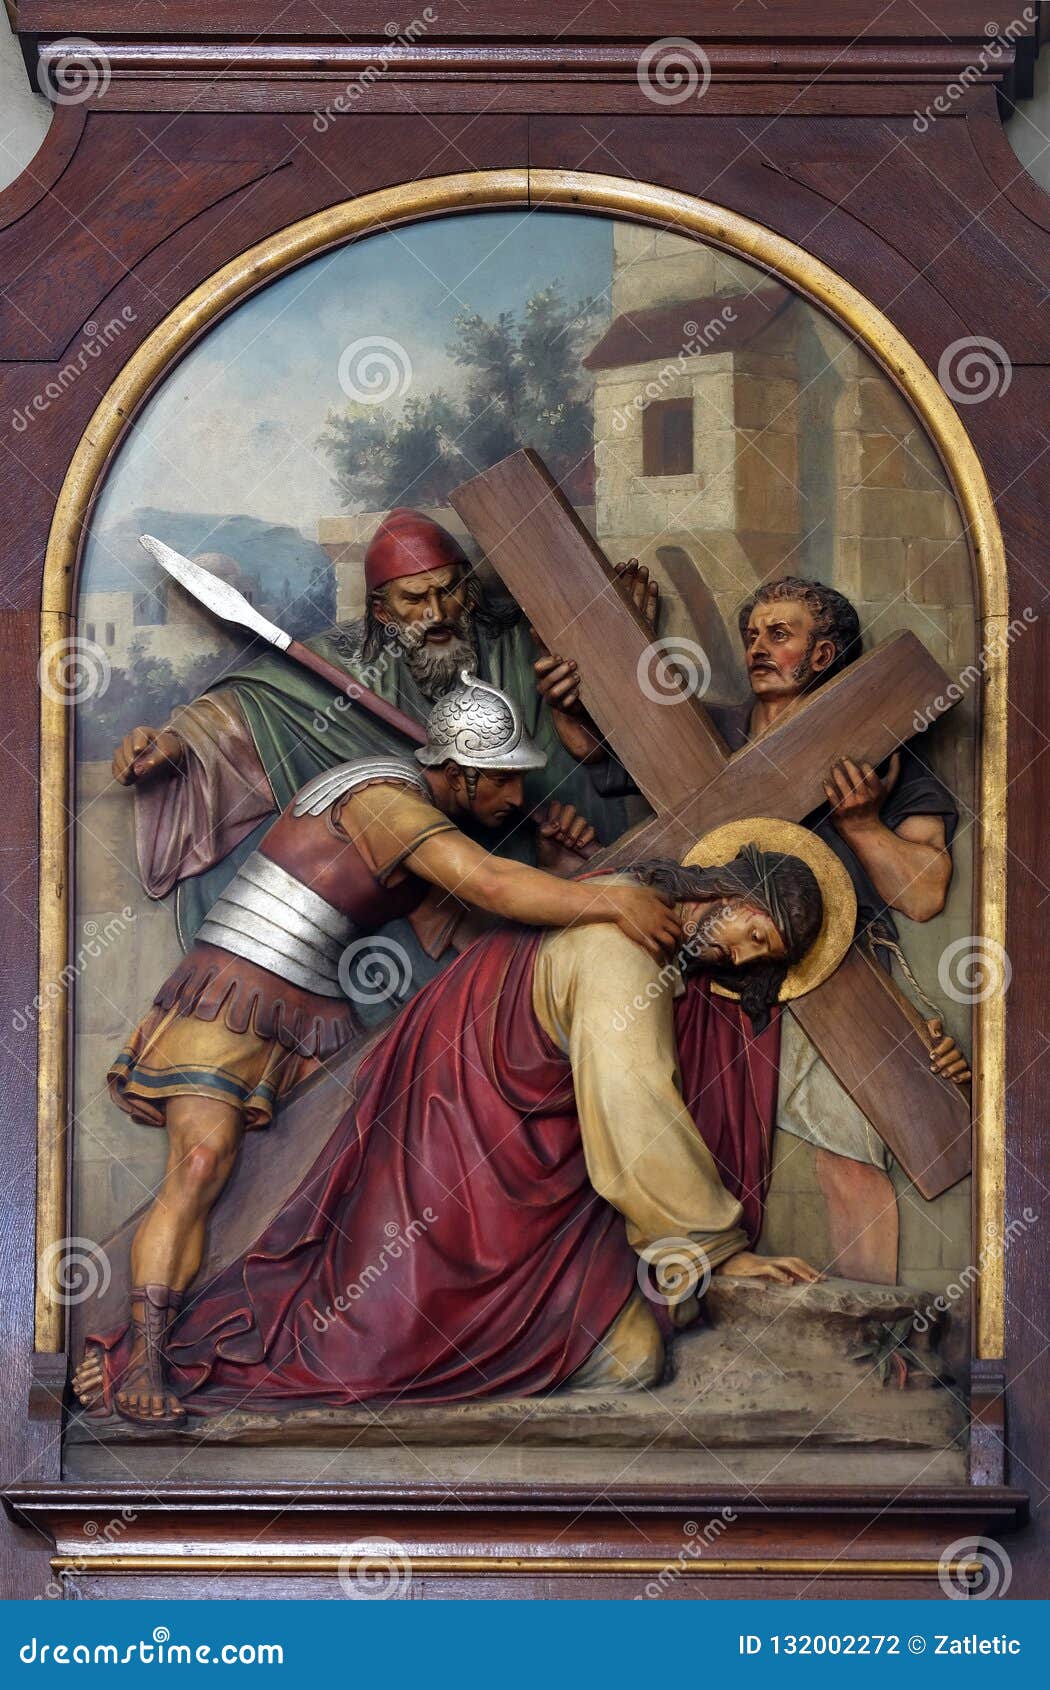 3rd stations of the cross, jesus falls the first time